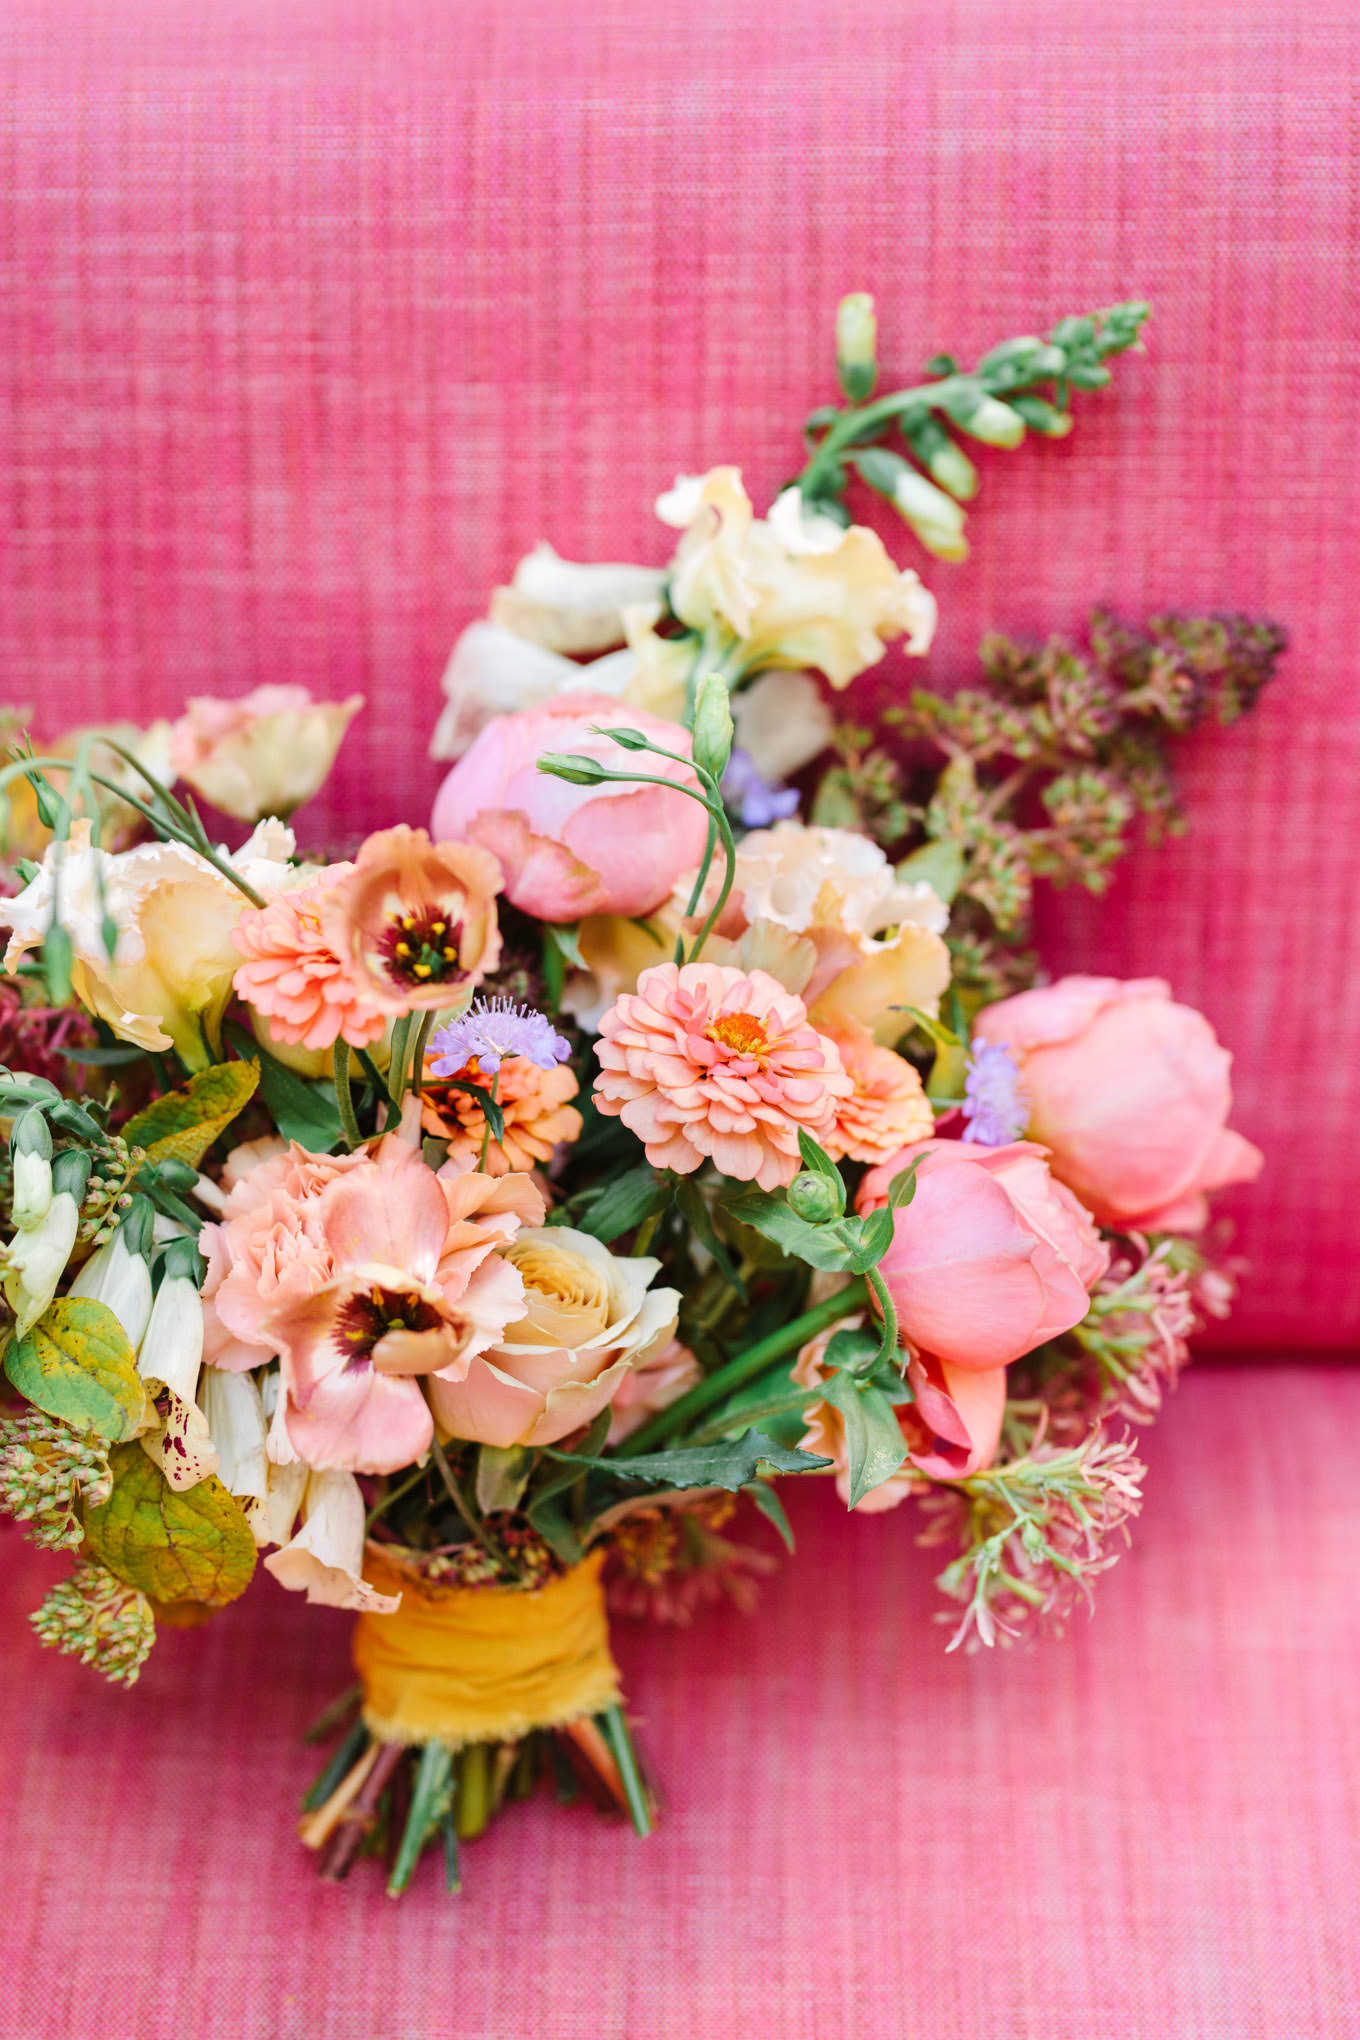 Colorful bouquet at Redbird restaurant | Engagement, elopement, and wedding photography roundup of Mary Costa’s favorite images from 2020 | Colorful and elevated photography for fun-loving couples in Southern California | #2020wedding #elopement #weddingphoto #weddingphotography #microwedding   Source: Mary Costa Photography | Los Angeles